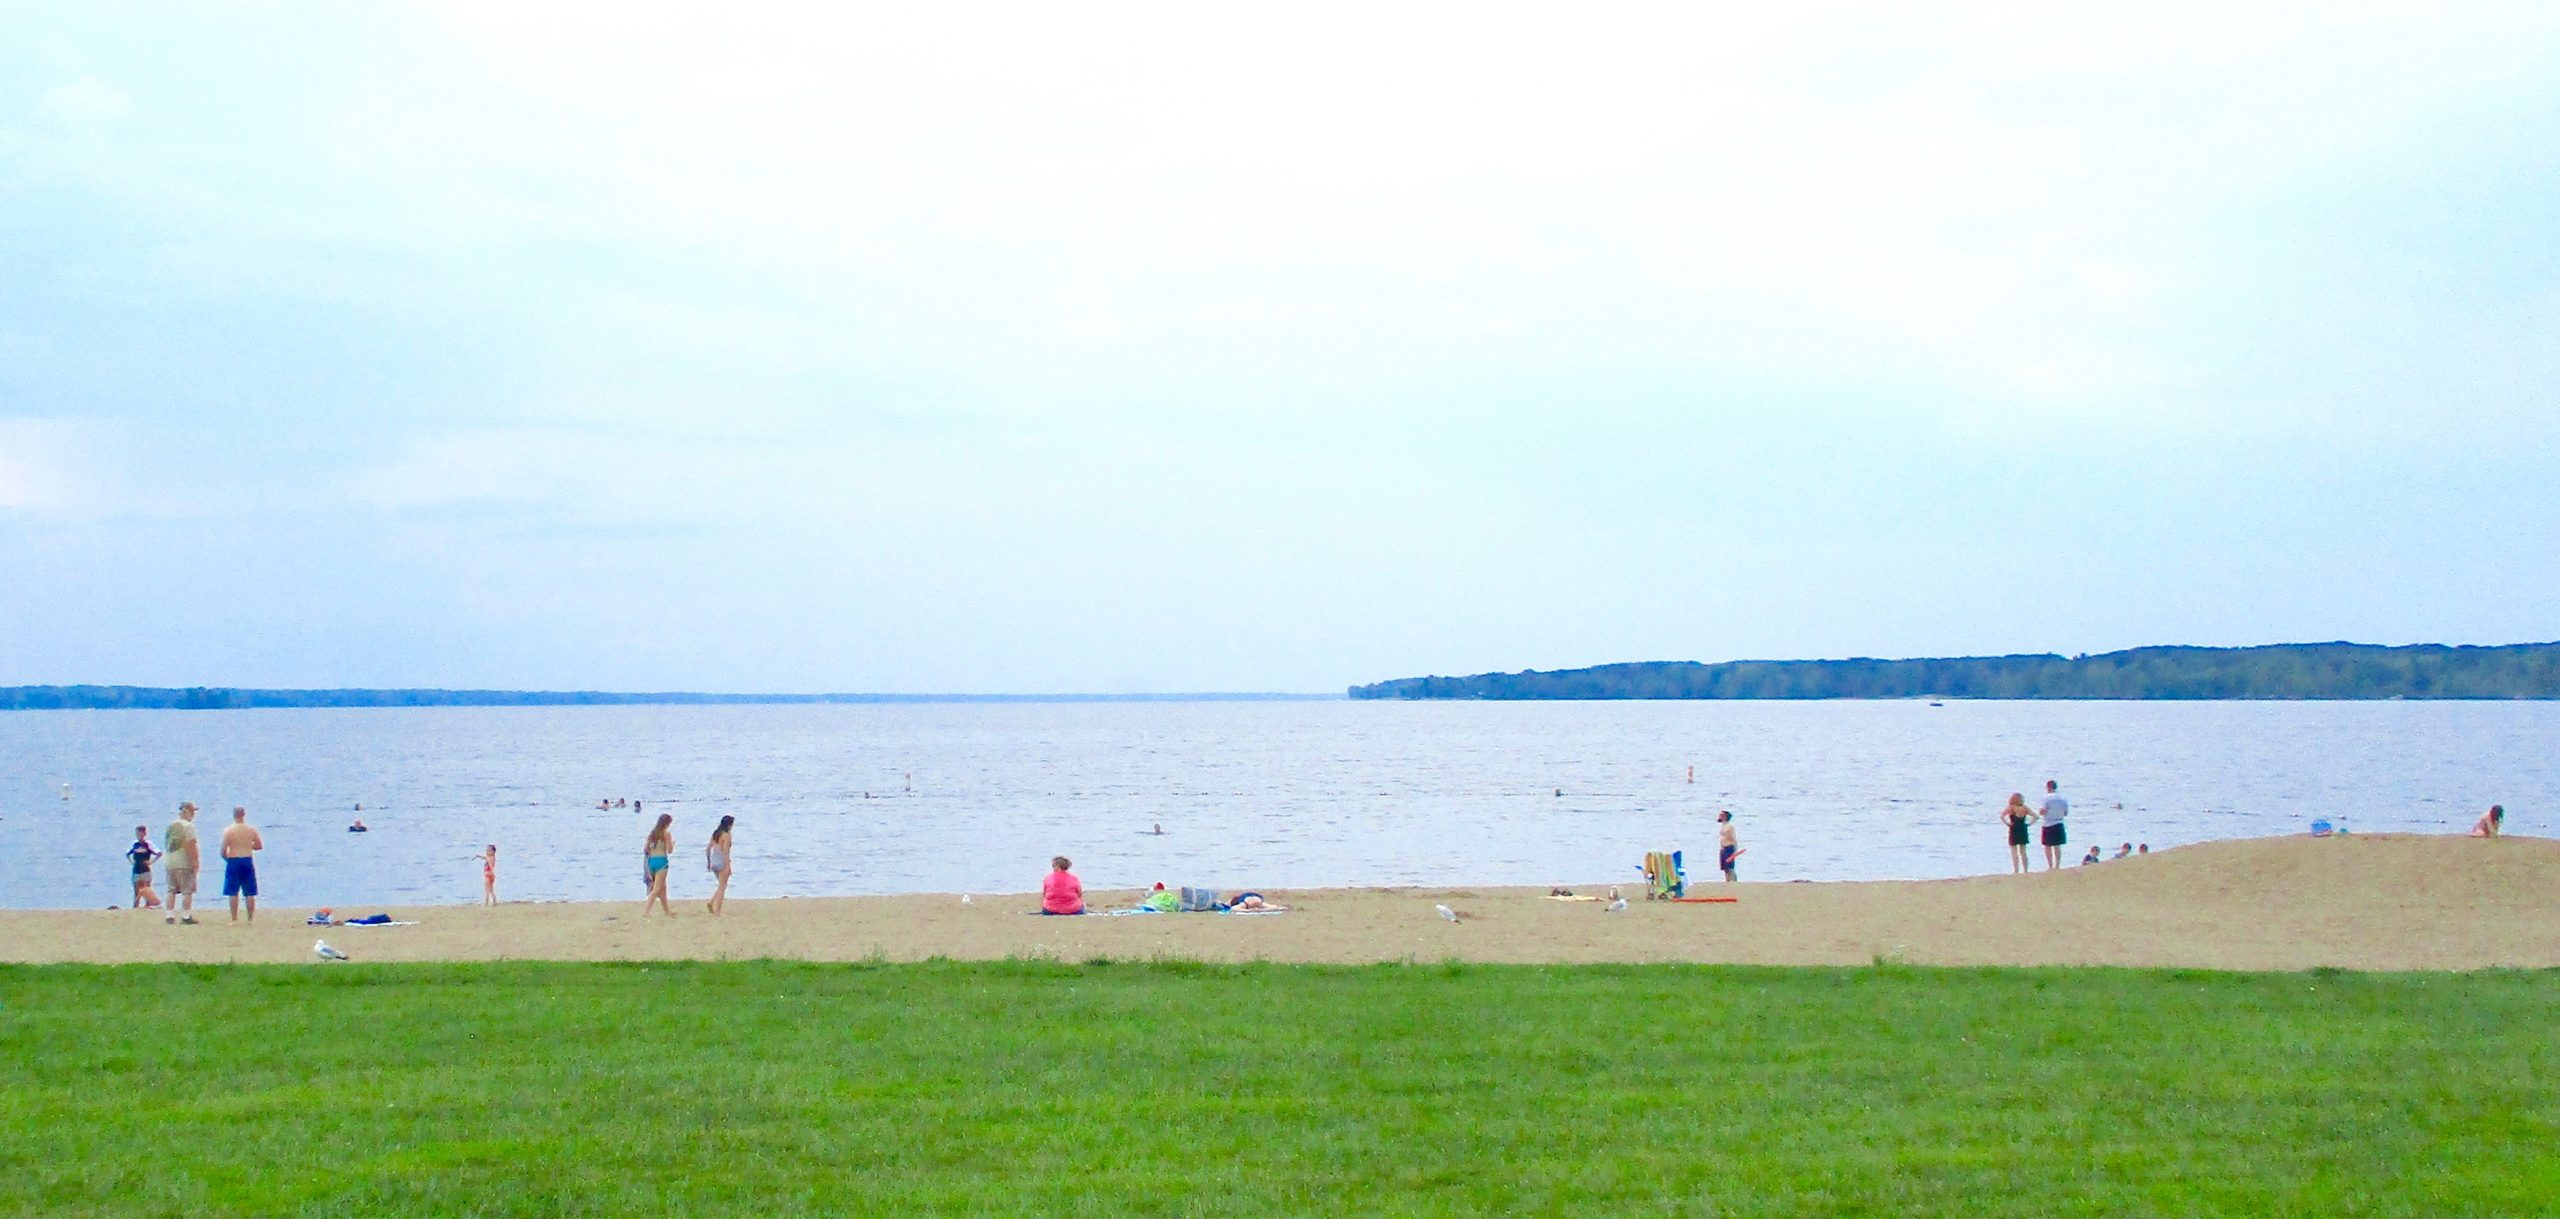 Look beyond the city to find wide-open beaches at state parks. This is one of several on the big lake at Pymatuning.